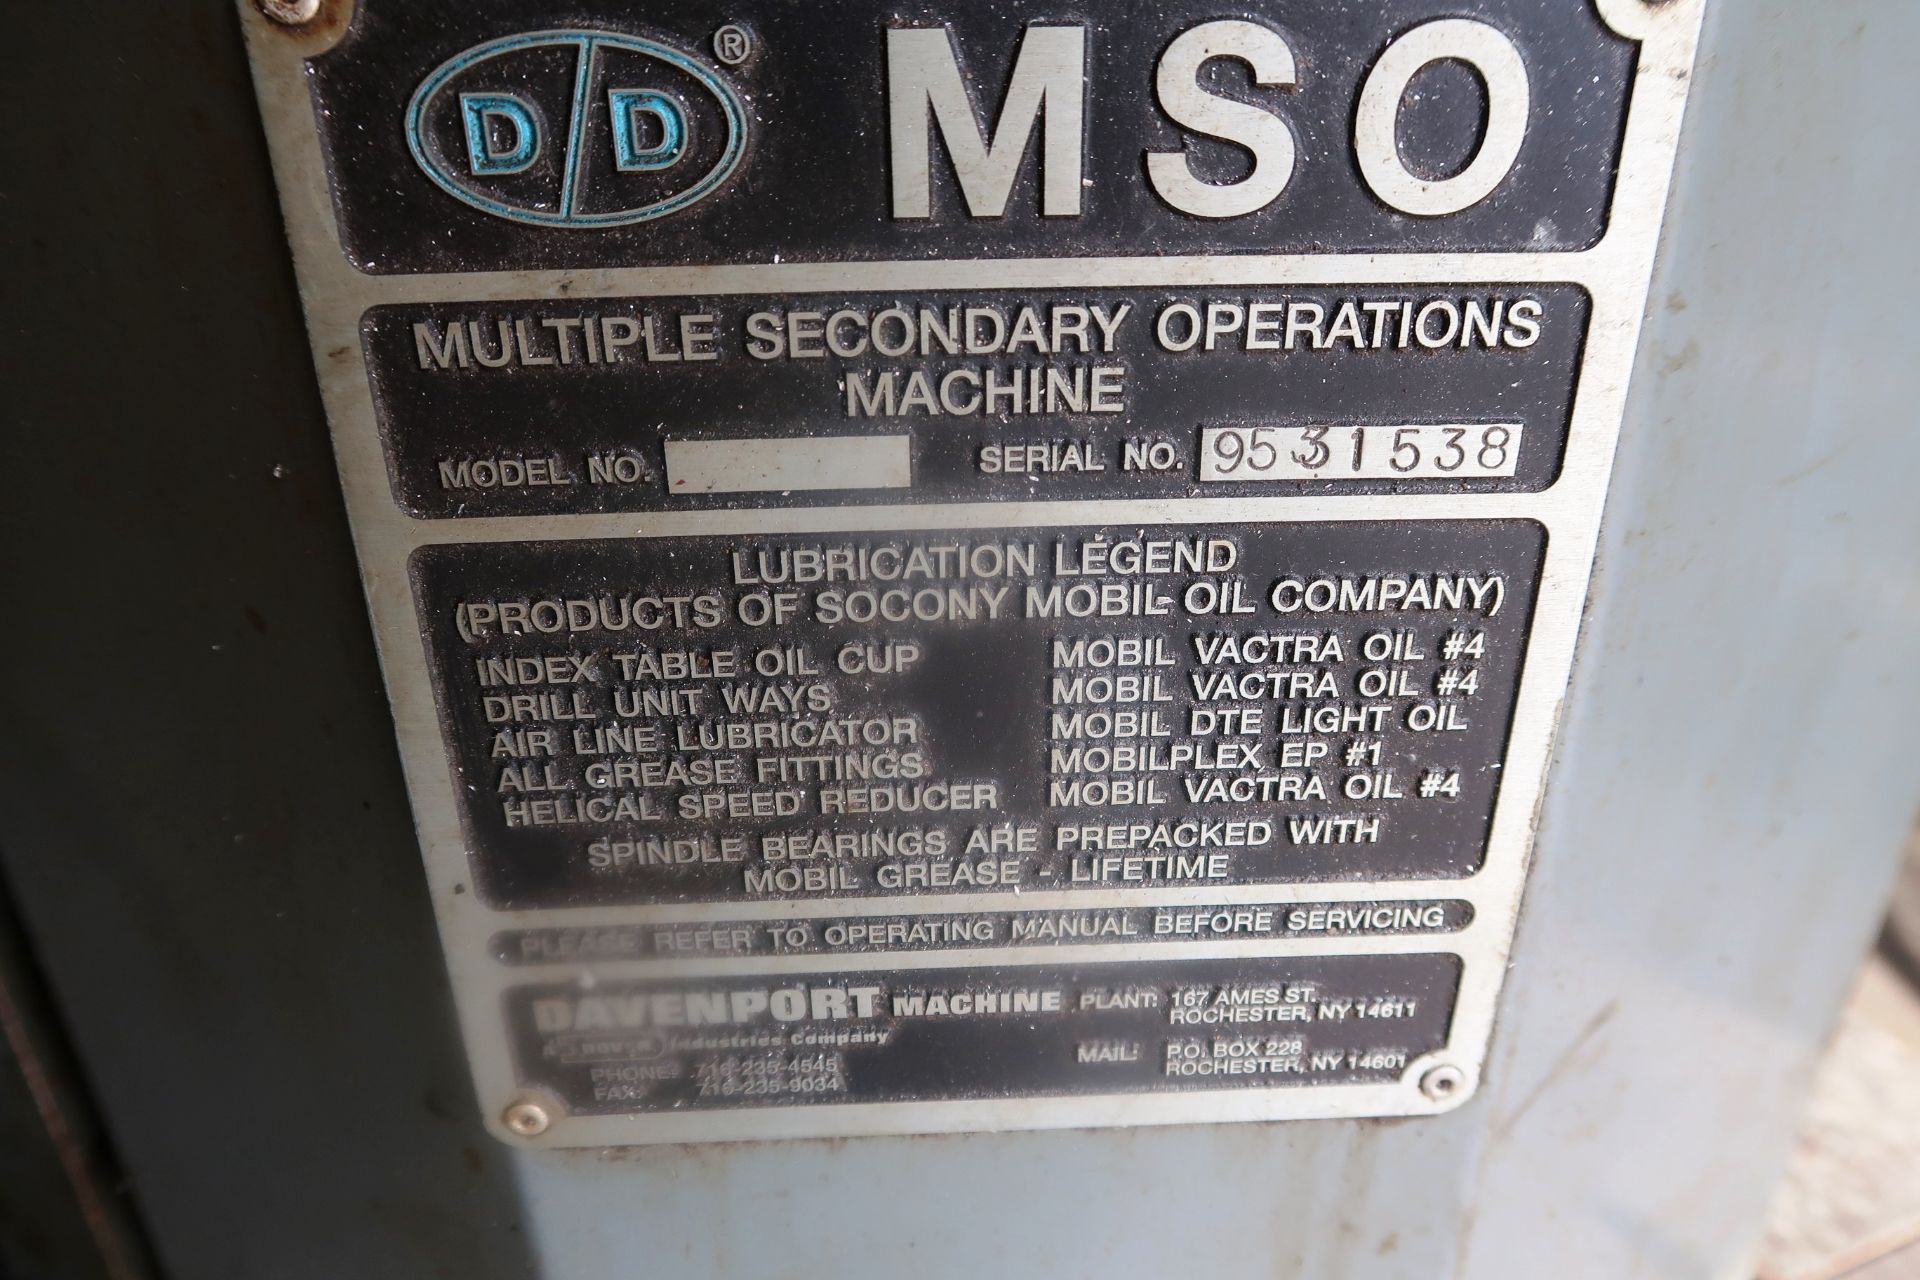 MSO DAVENPORT 5-SPINDLE MULTIPLE SECONDAY OPERATION ROTARY TRANSFER MACHINE, S/N 9531538, NEW 1995 - Image 6 of 9